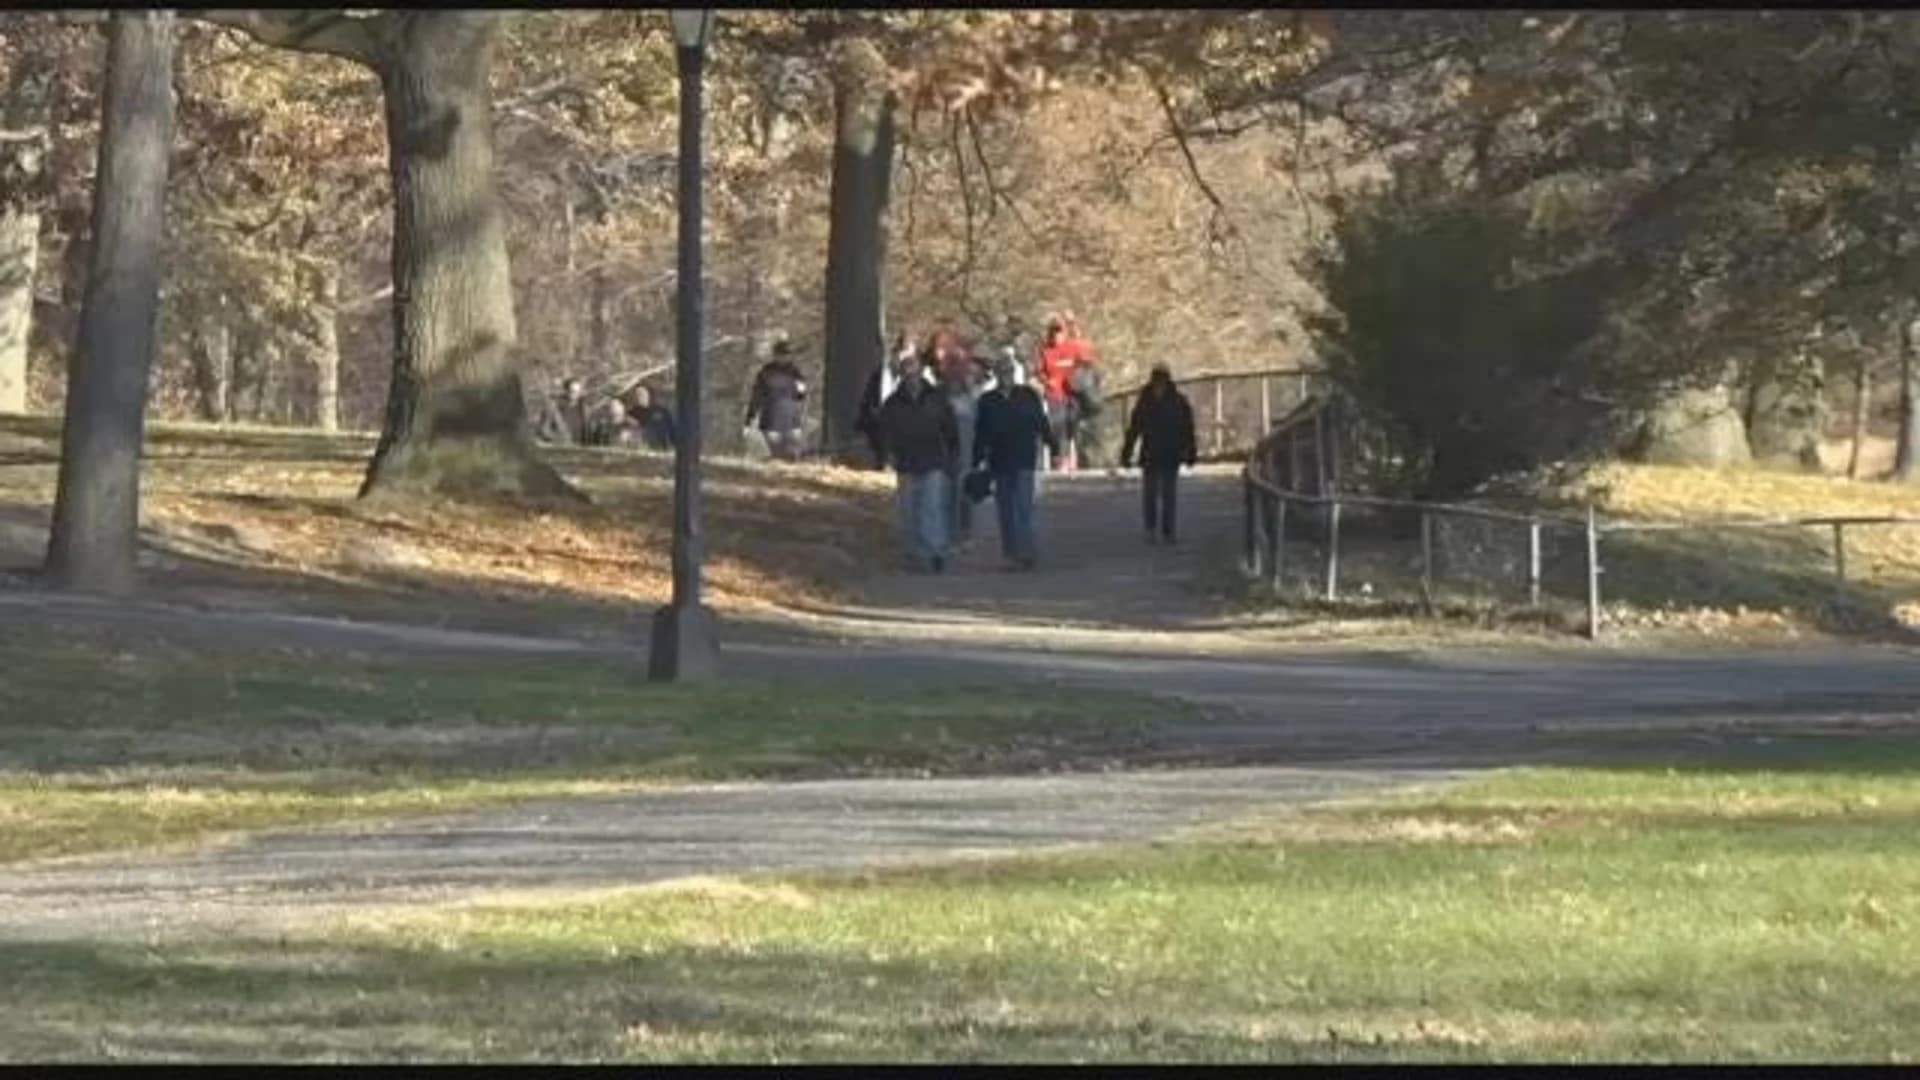 NYC Parks Departments offers hikes to help shed unwanted Thanksgiving weight